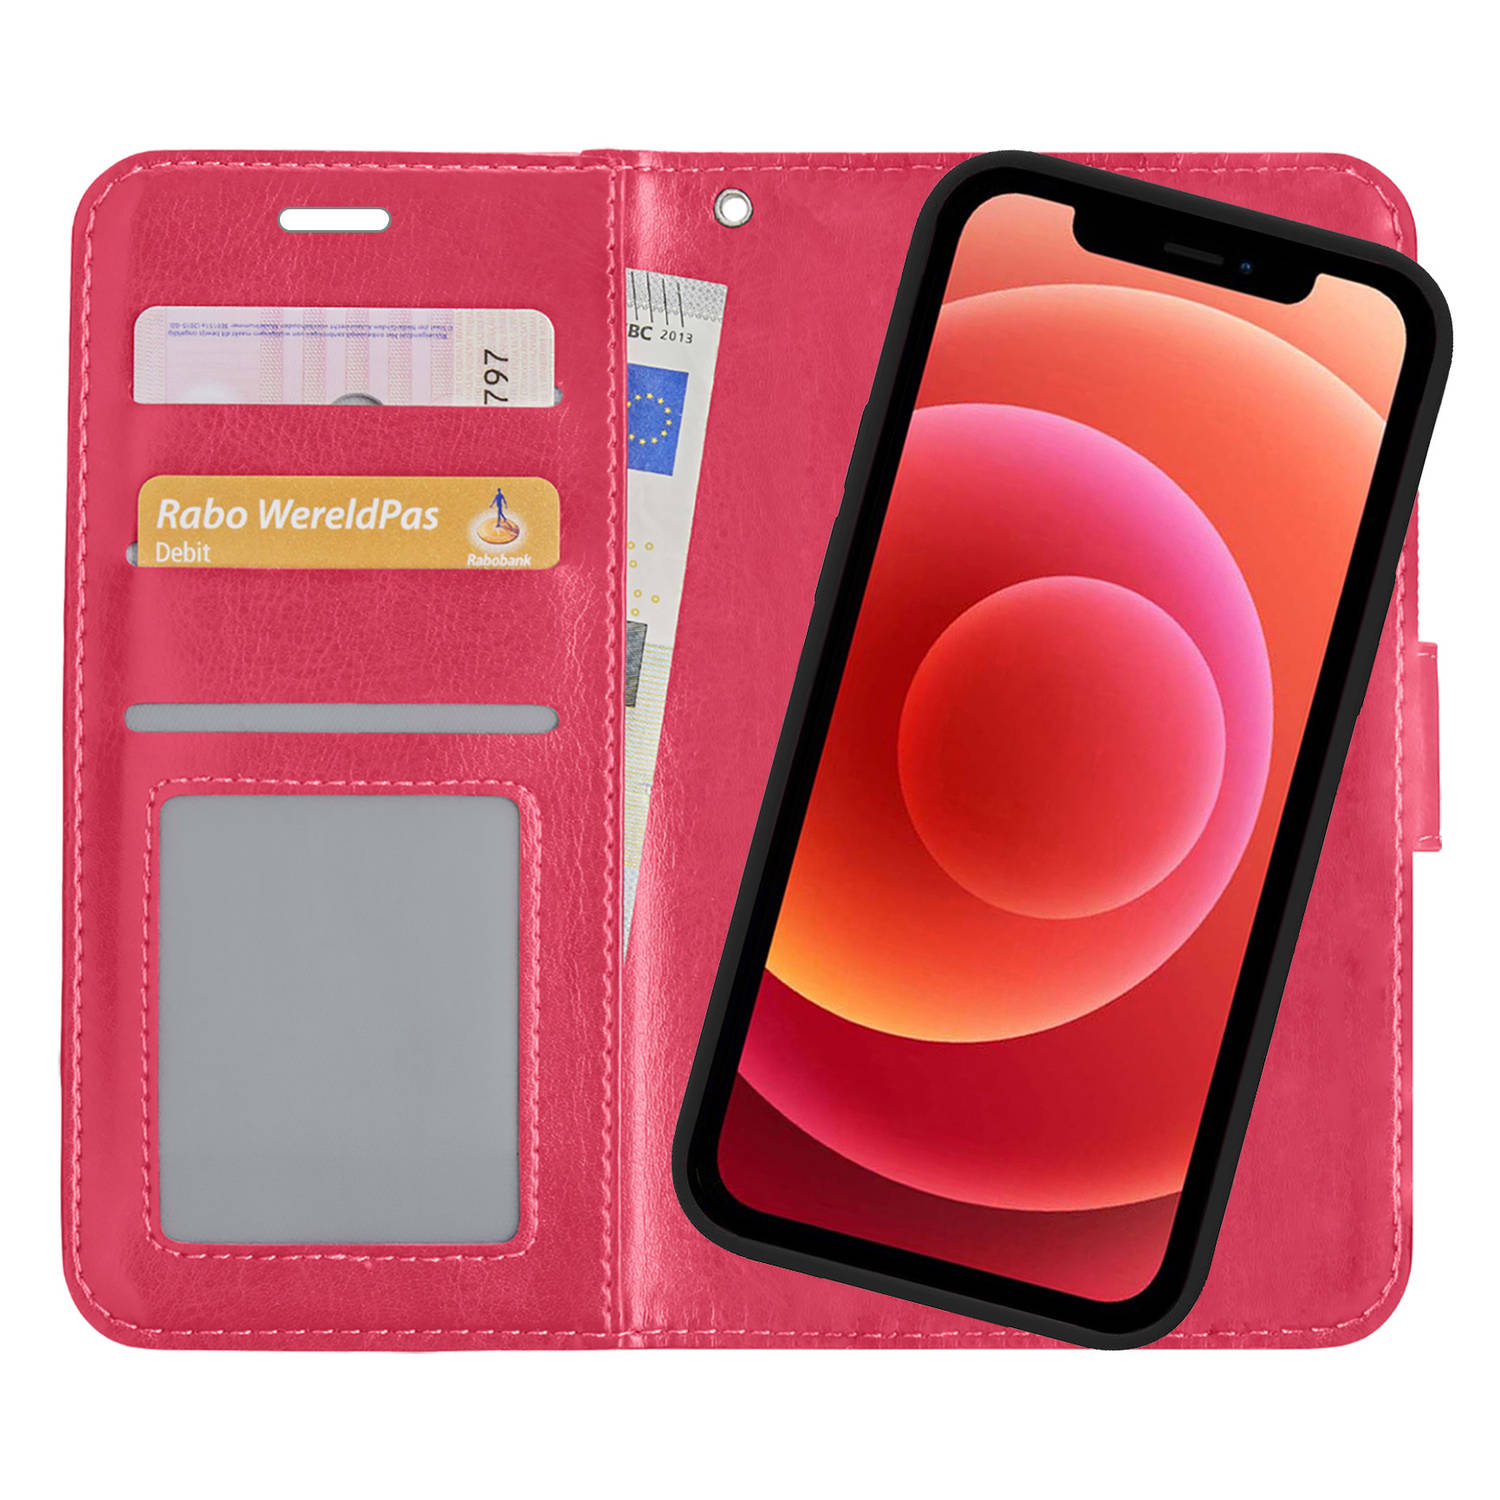 iPhone 12 Pro Max Hoesje Bookcase Hoes 2-in-1 Cover - iPhone 12 Pro Max Hoes 2-in-1 Hoesje Case - Donker Roze